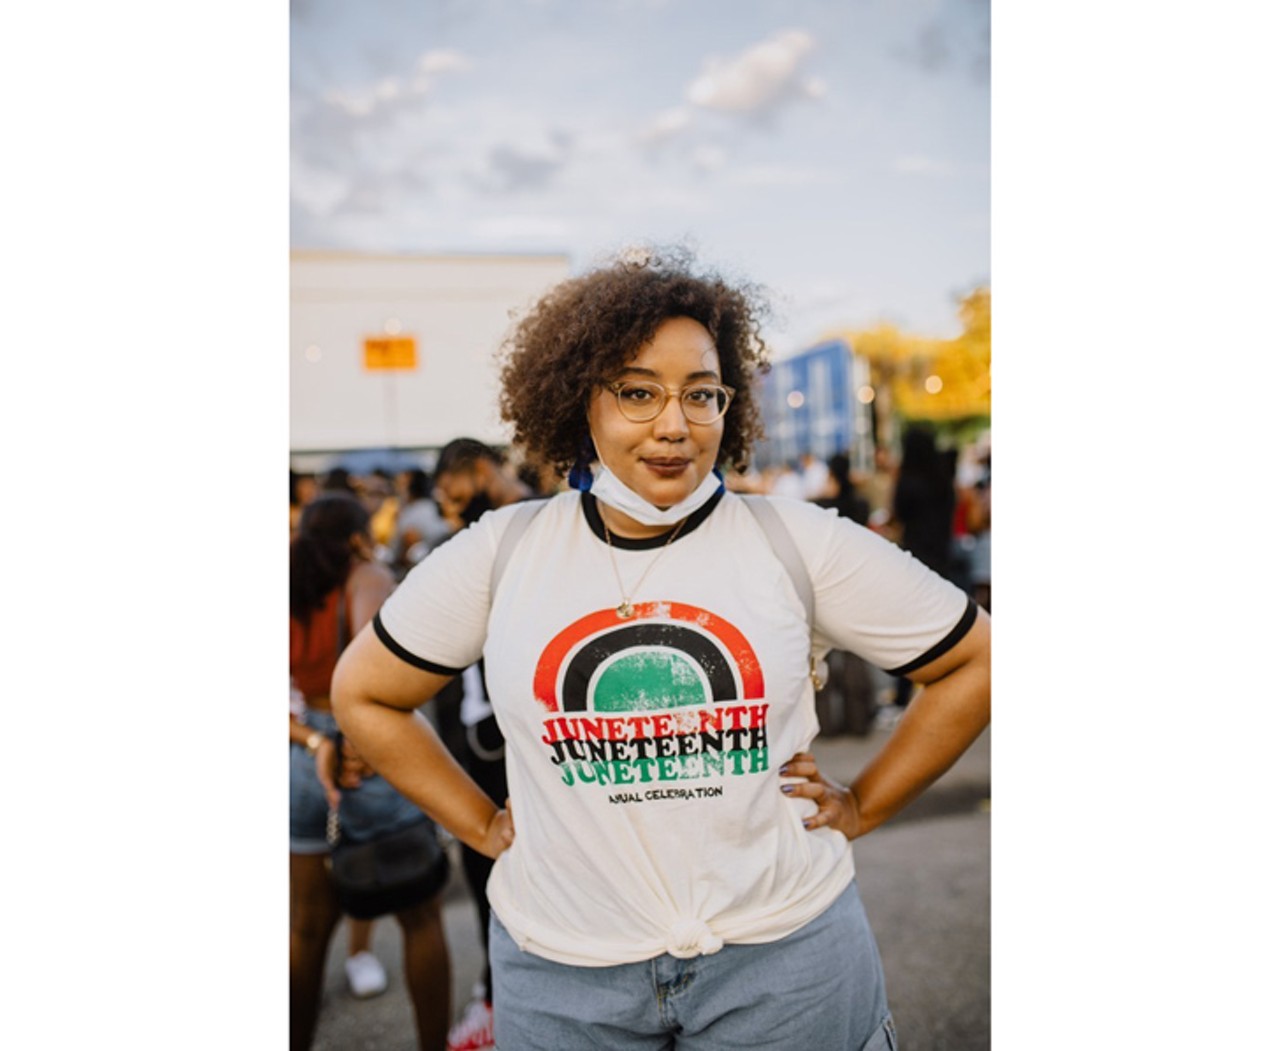 Photos from Friday night's Juneteenth block party